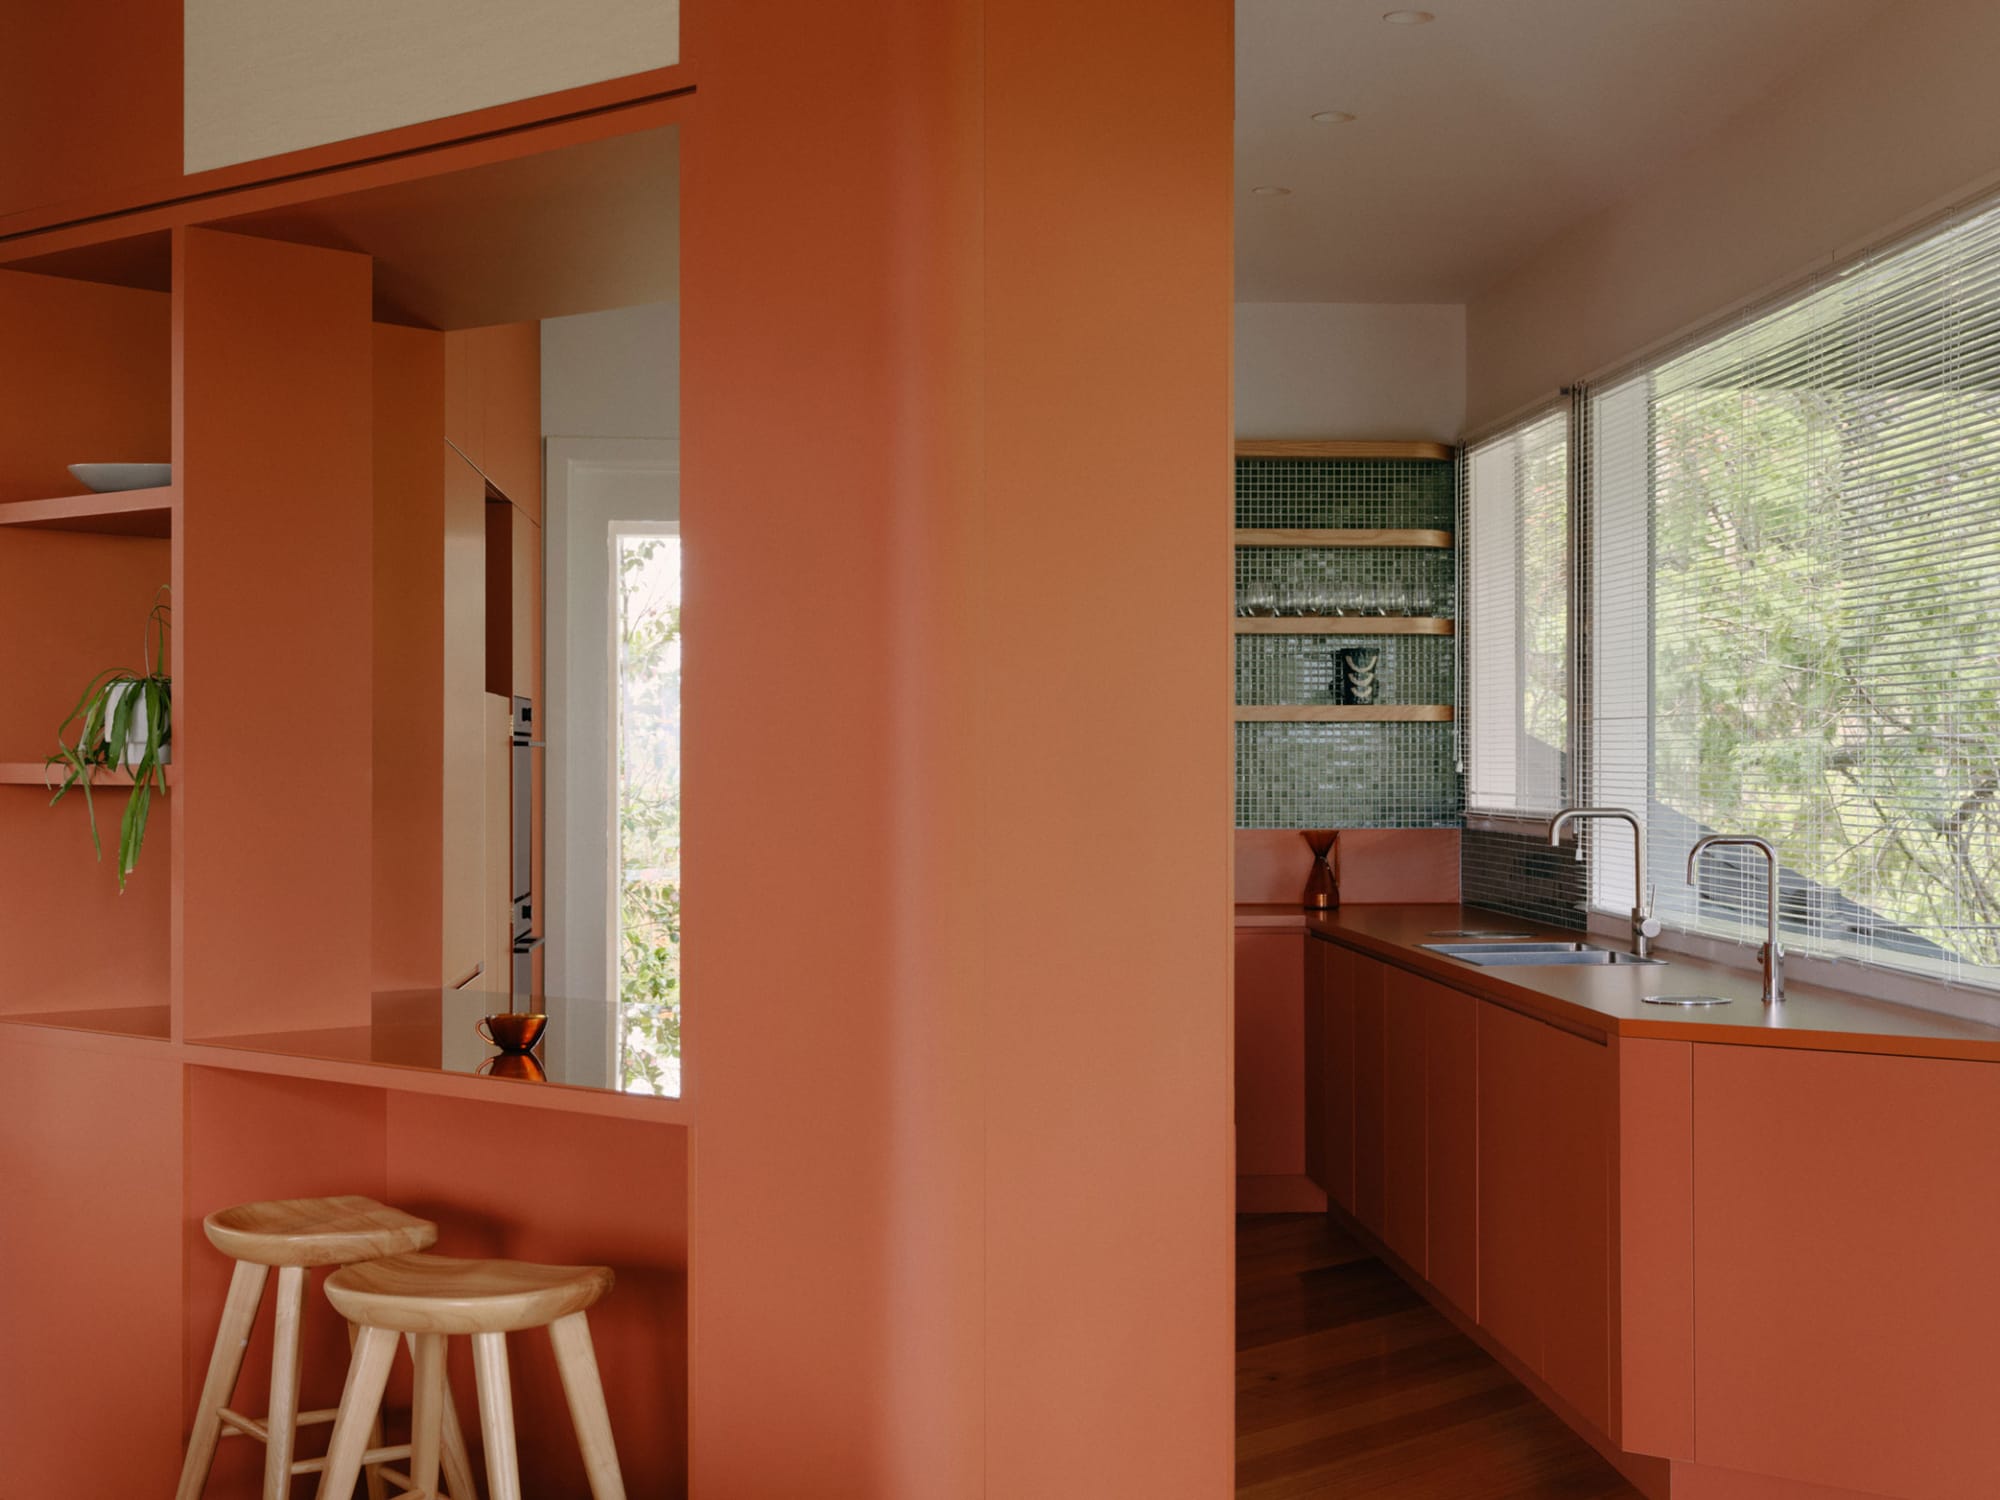 Selby House by Placement. Photography by Tom Ross. Residential kitchen with clay-coloured cabinetry and partition walls. Timber floors. Bottle green splashback tile.